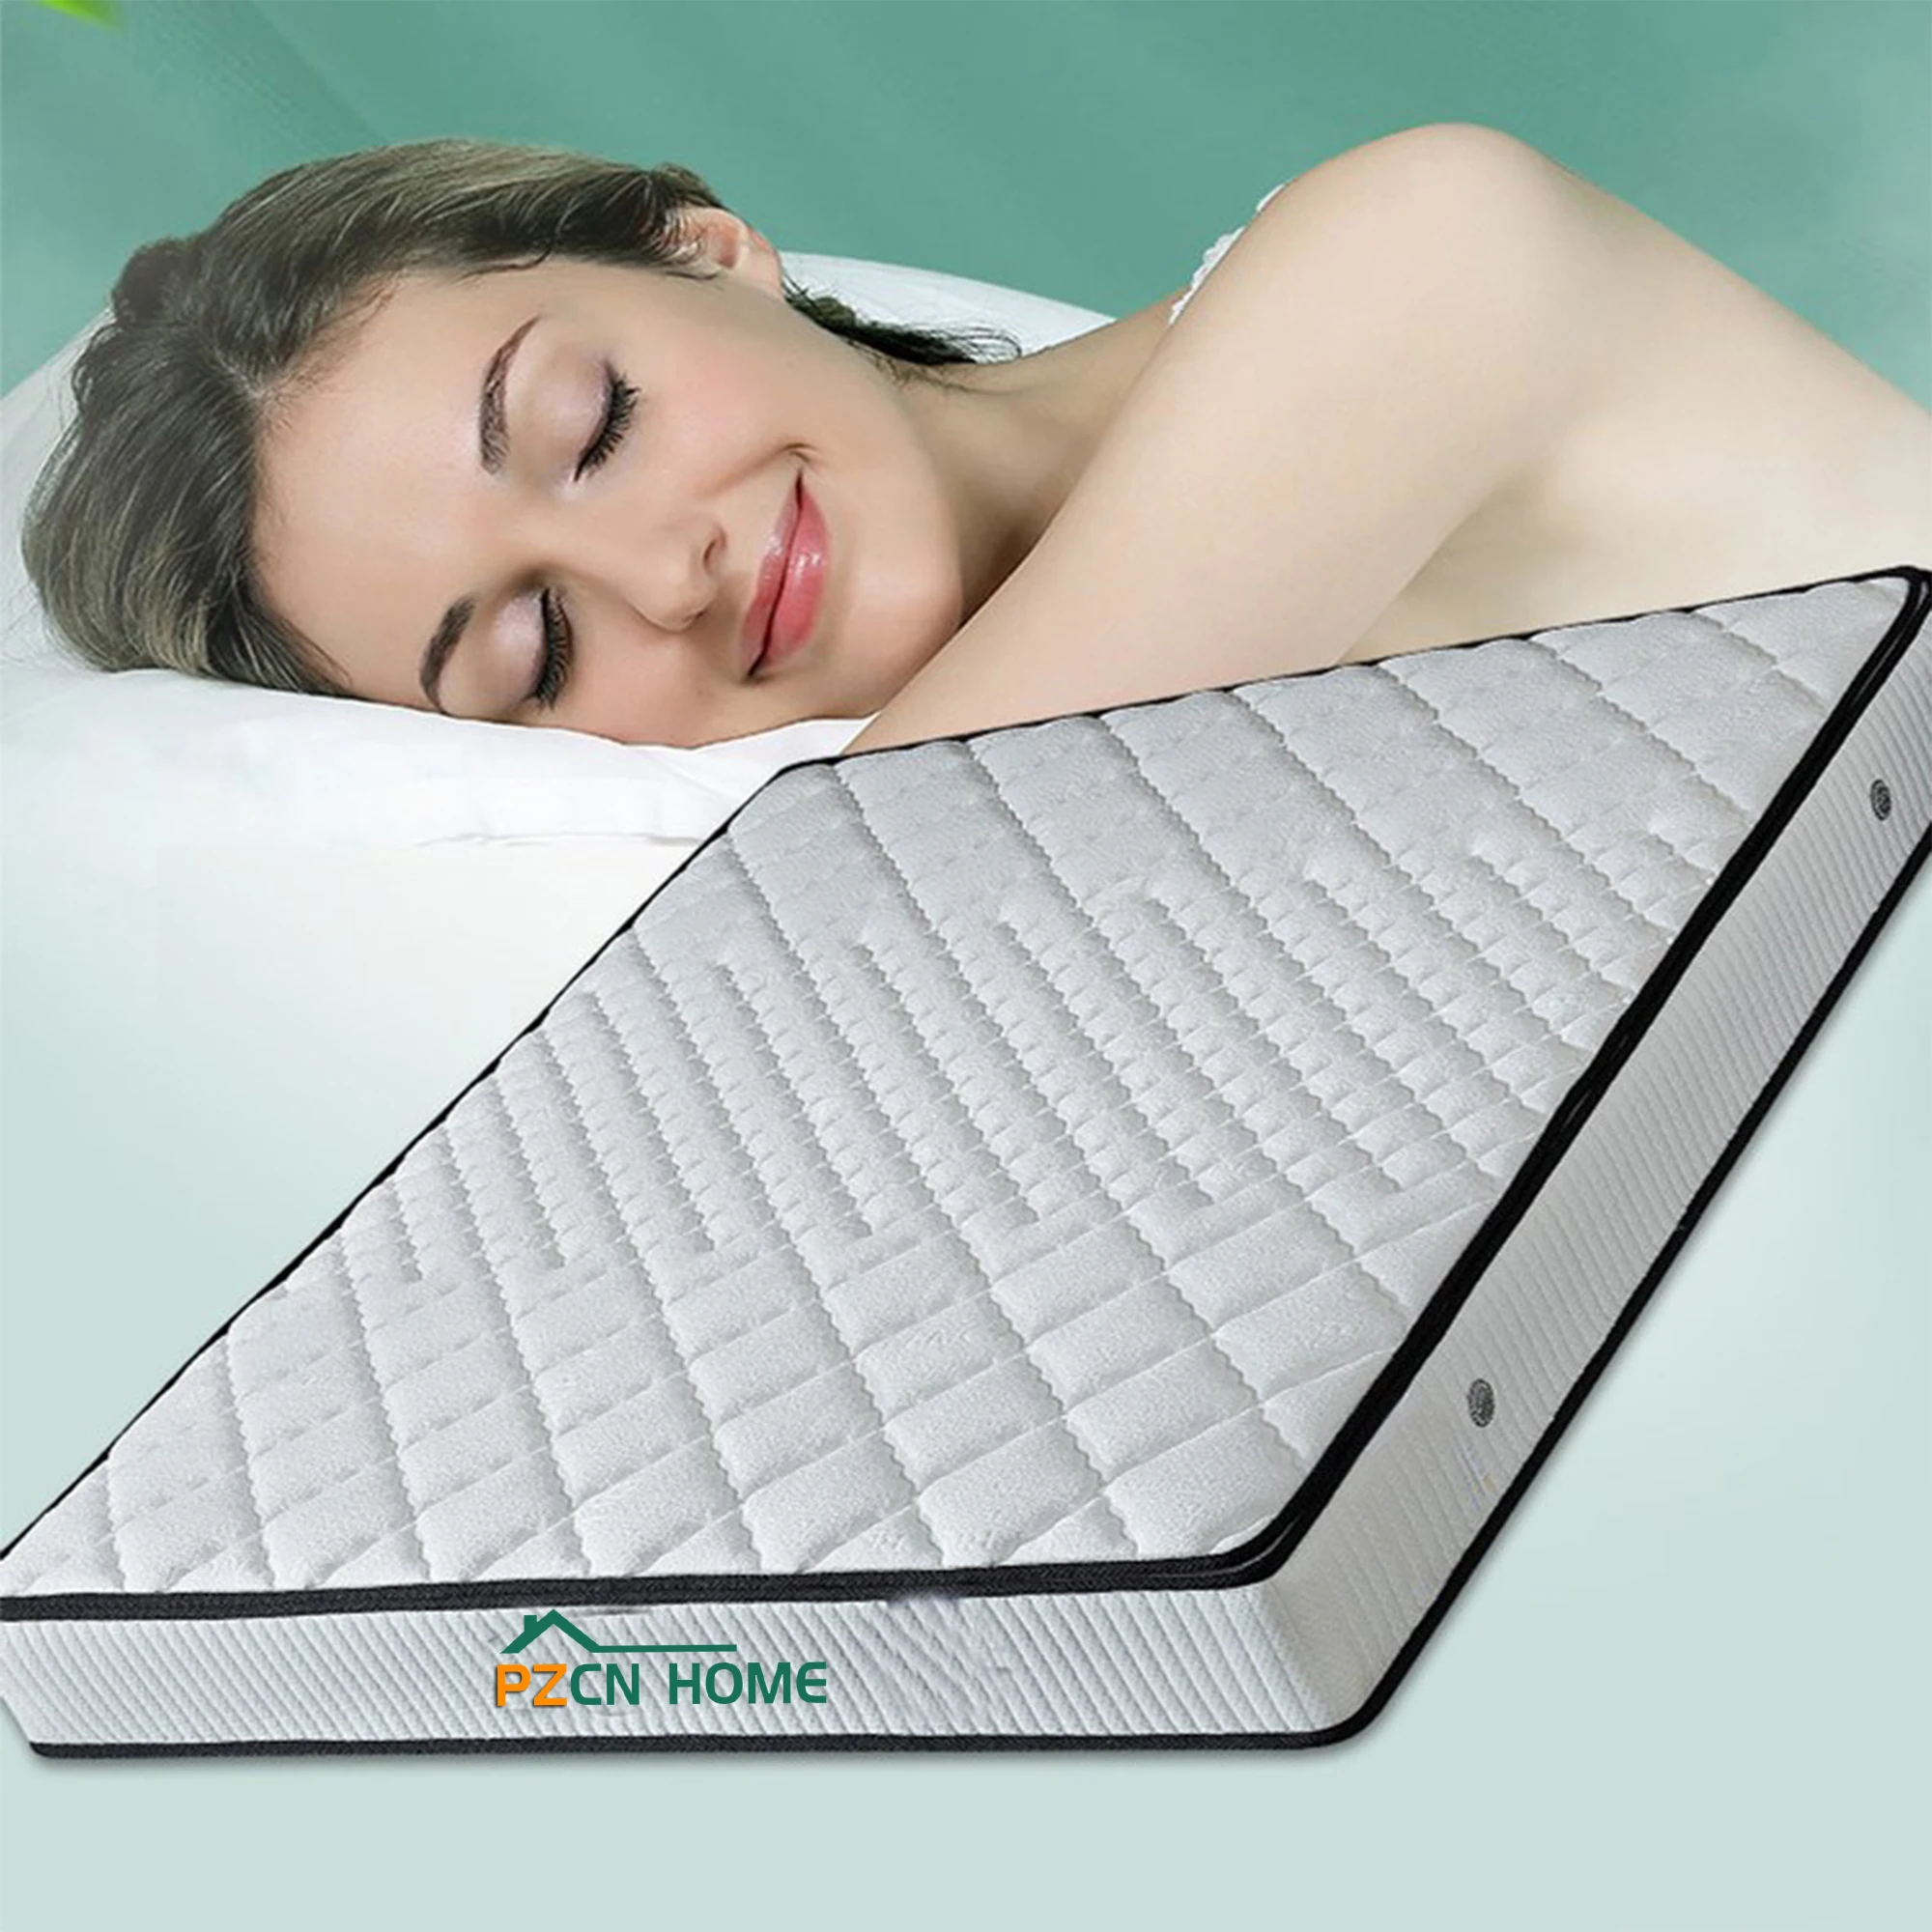 Bed In A Box Compressed Gel Infused Memory Foam Mattress